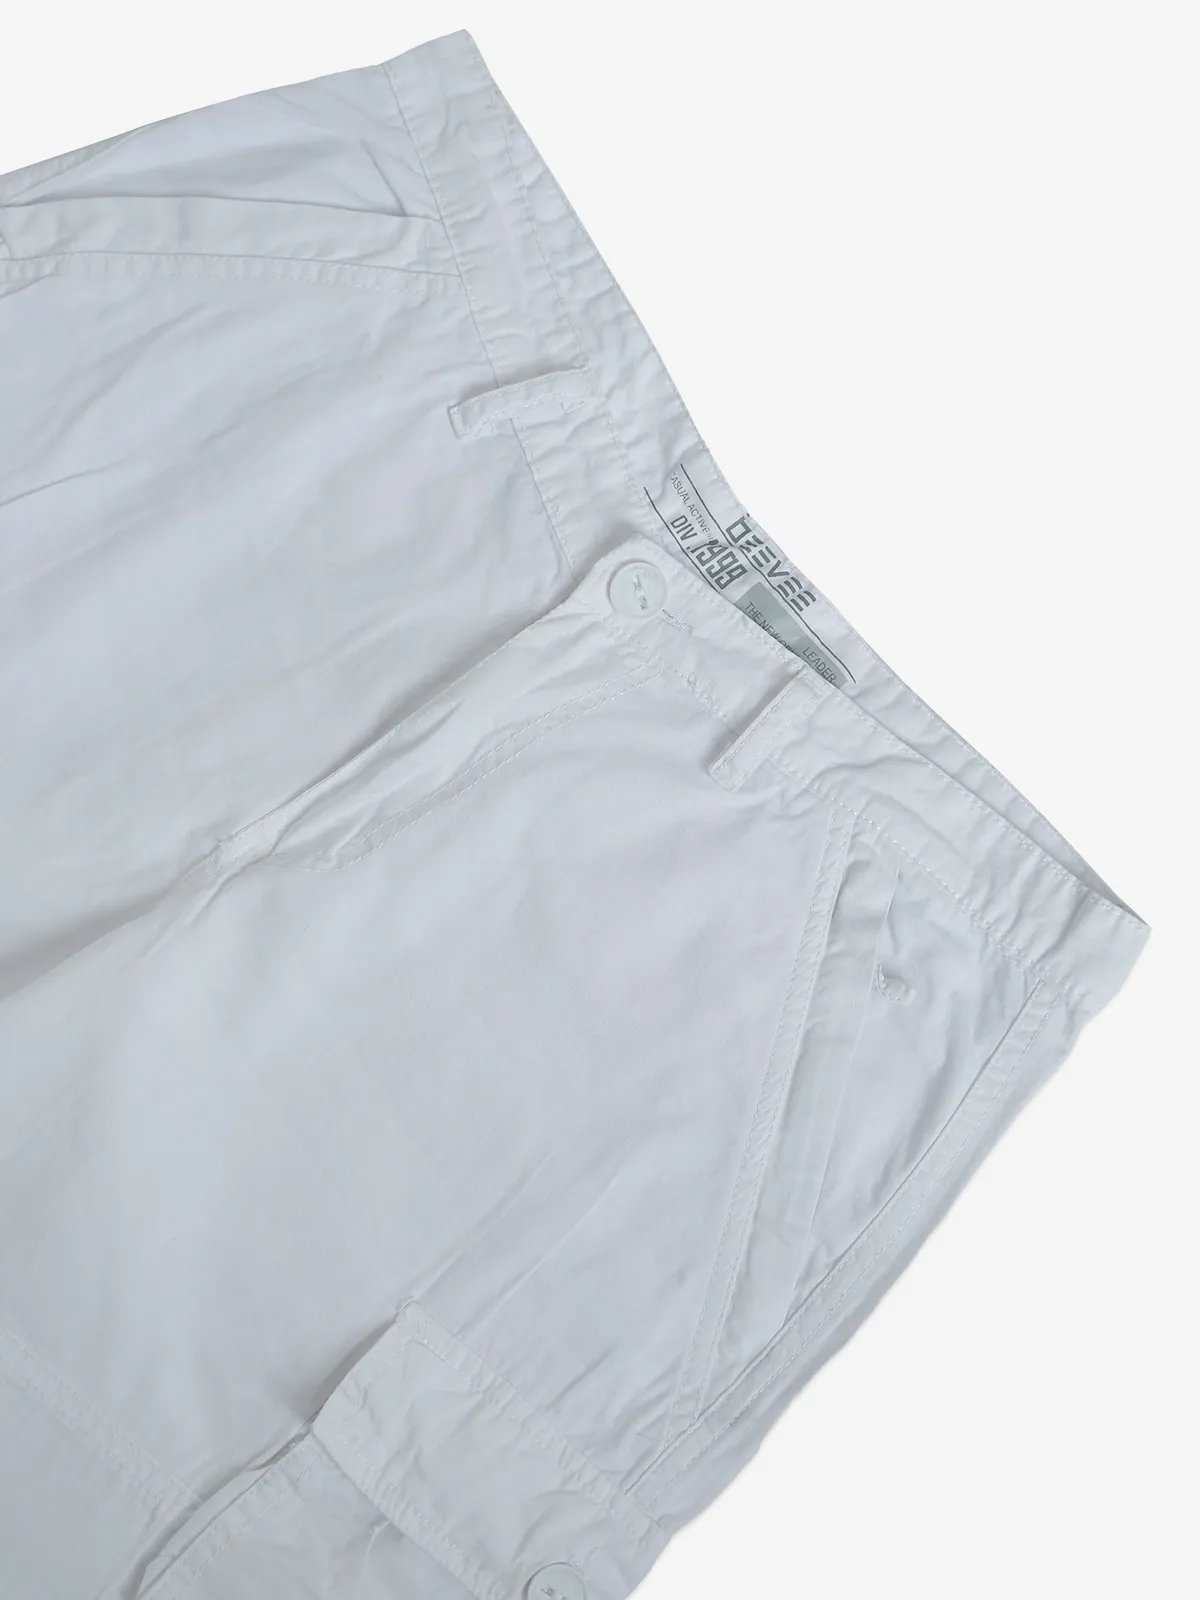 BEEVEE white solid shorts